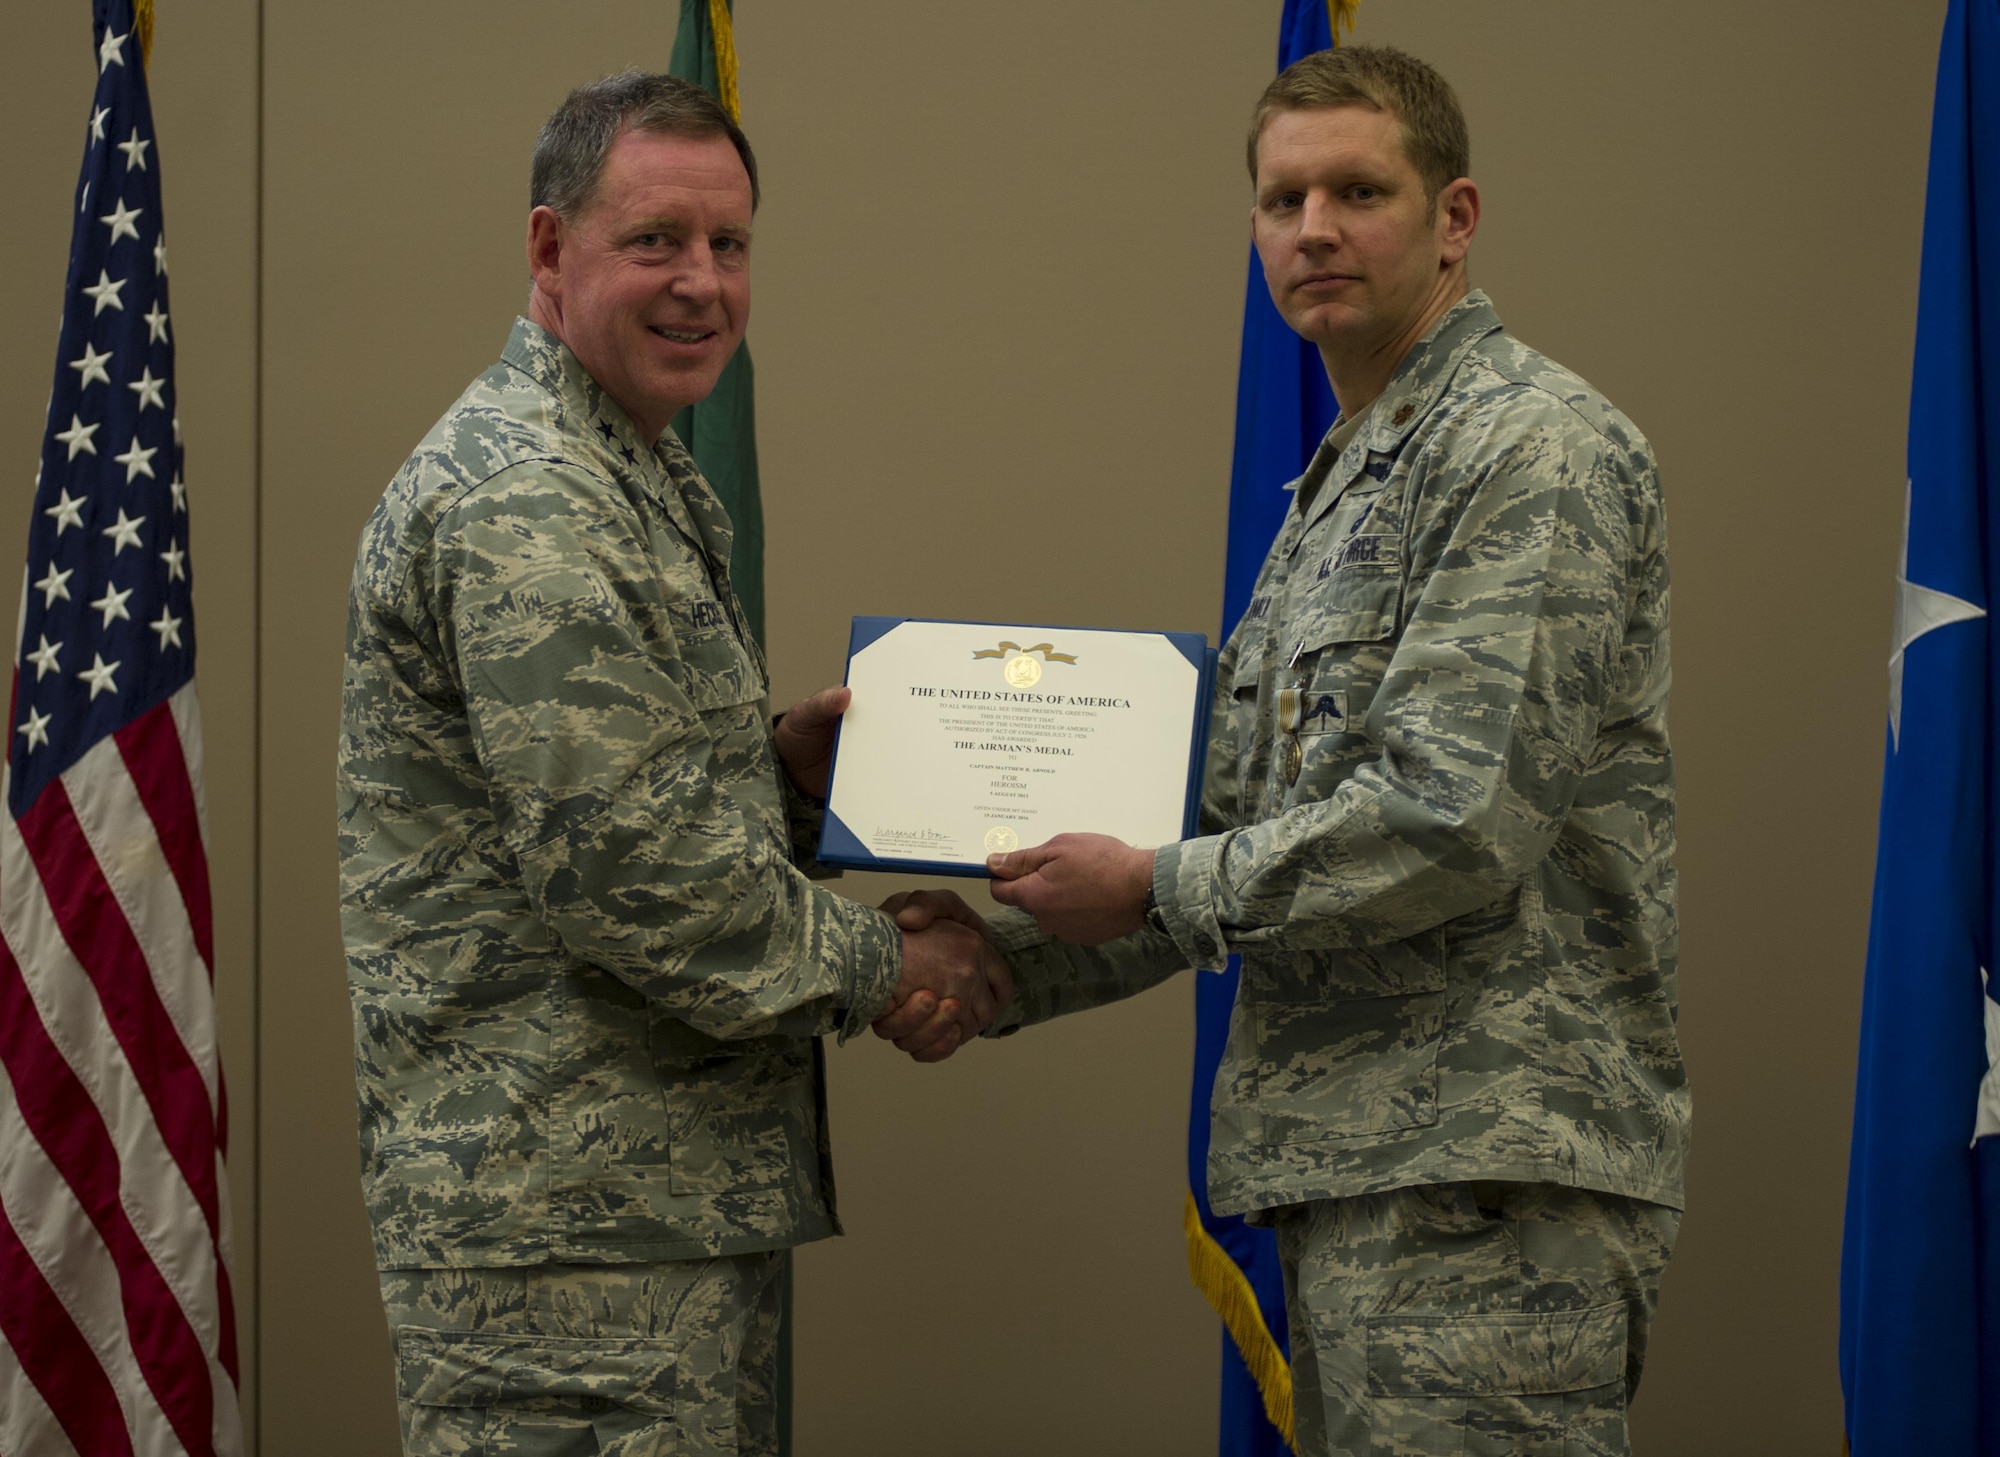 Maj. Matthew Arnold, right, the 336th Training Group chief of standards and evaluations, receives the Airman’s Medal during a ceremony April 8, 2016, at Fairchild Air Force Base, Wash. In 2013, Arnold and Tech. Sgt. Dean Criswell, the 22nd Special Tactics Squadron NCO in charge of rescue operations, were participating in a routine training exercise in Okinawa, Japan, when an HH-60G Pave Hawk went down. They helped save three of the four Airmen on the helicopter. (U.S. Air Force photo/Airman 1st Class Sean Campbell)